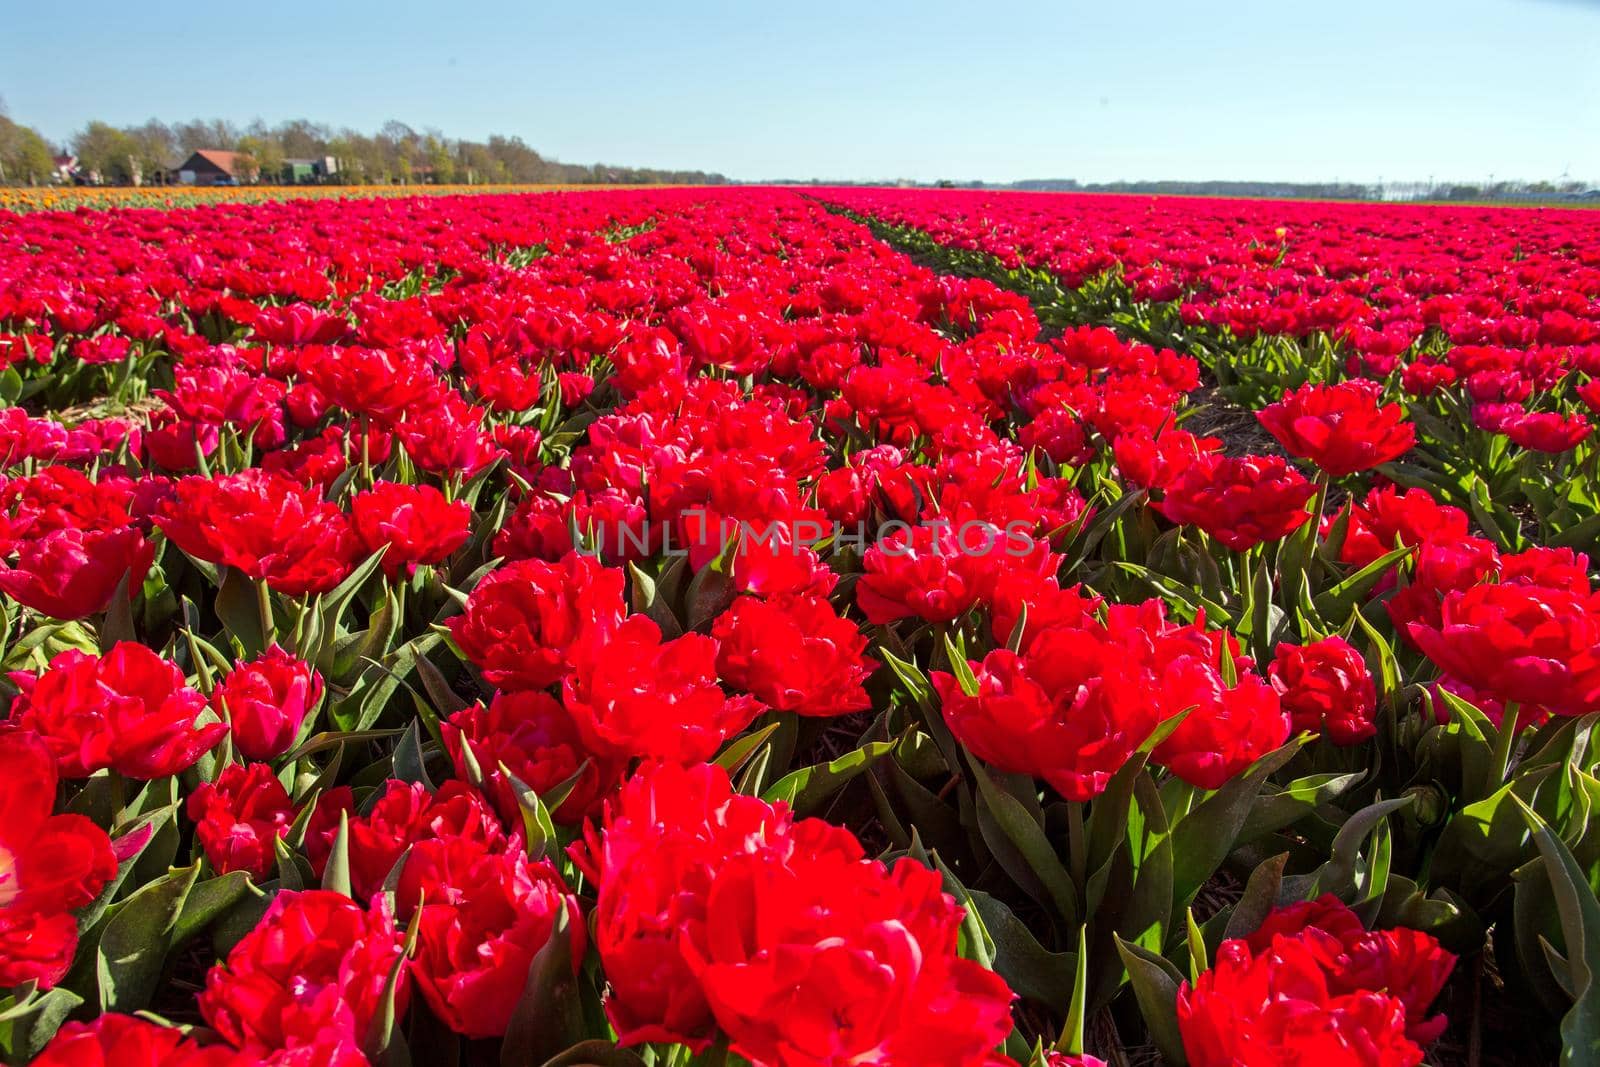 Tulip fields in spring in the countryside from the Netherlands by devy